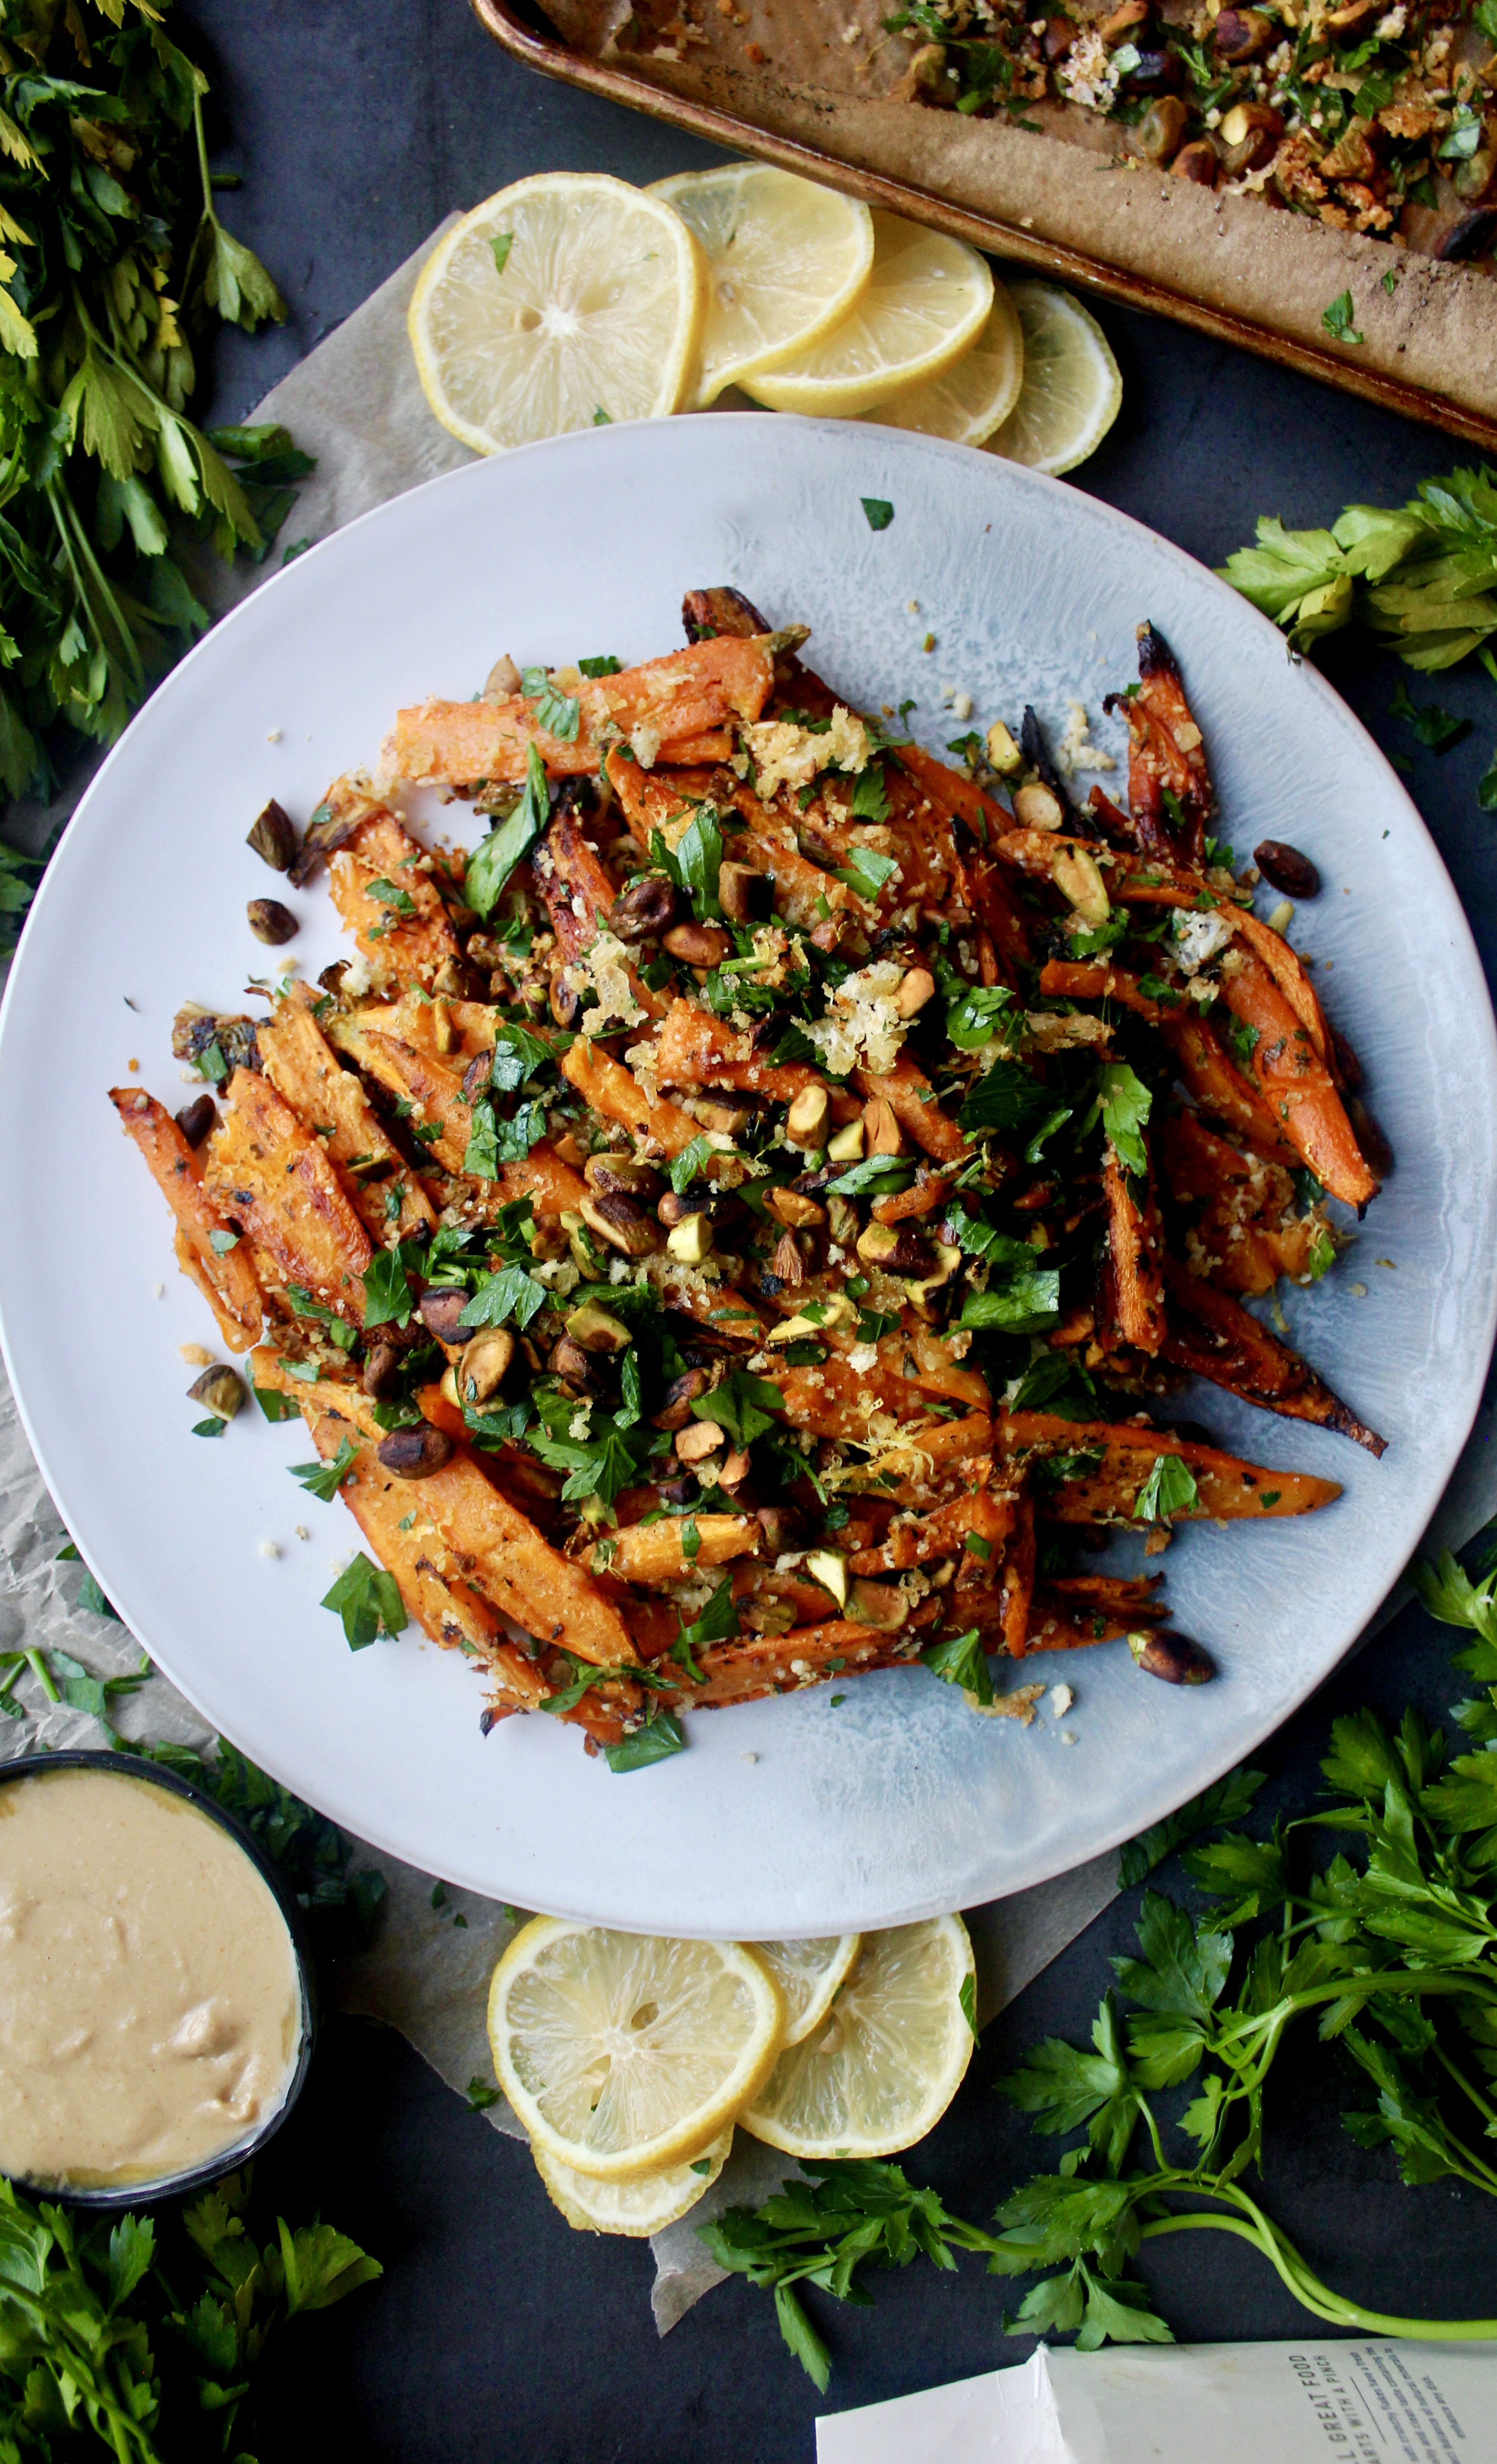 Twice baked, crispy cheese smashed carrots tossed with all the parmesan cheese, fresh parsley, and toasty pistachios: these Parmesan Pistachio Smashed Carrots are the best vegetable side dish.